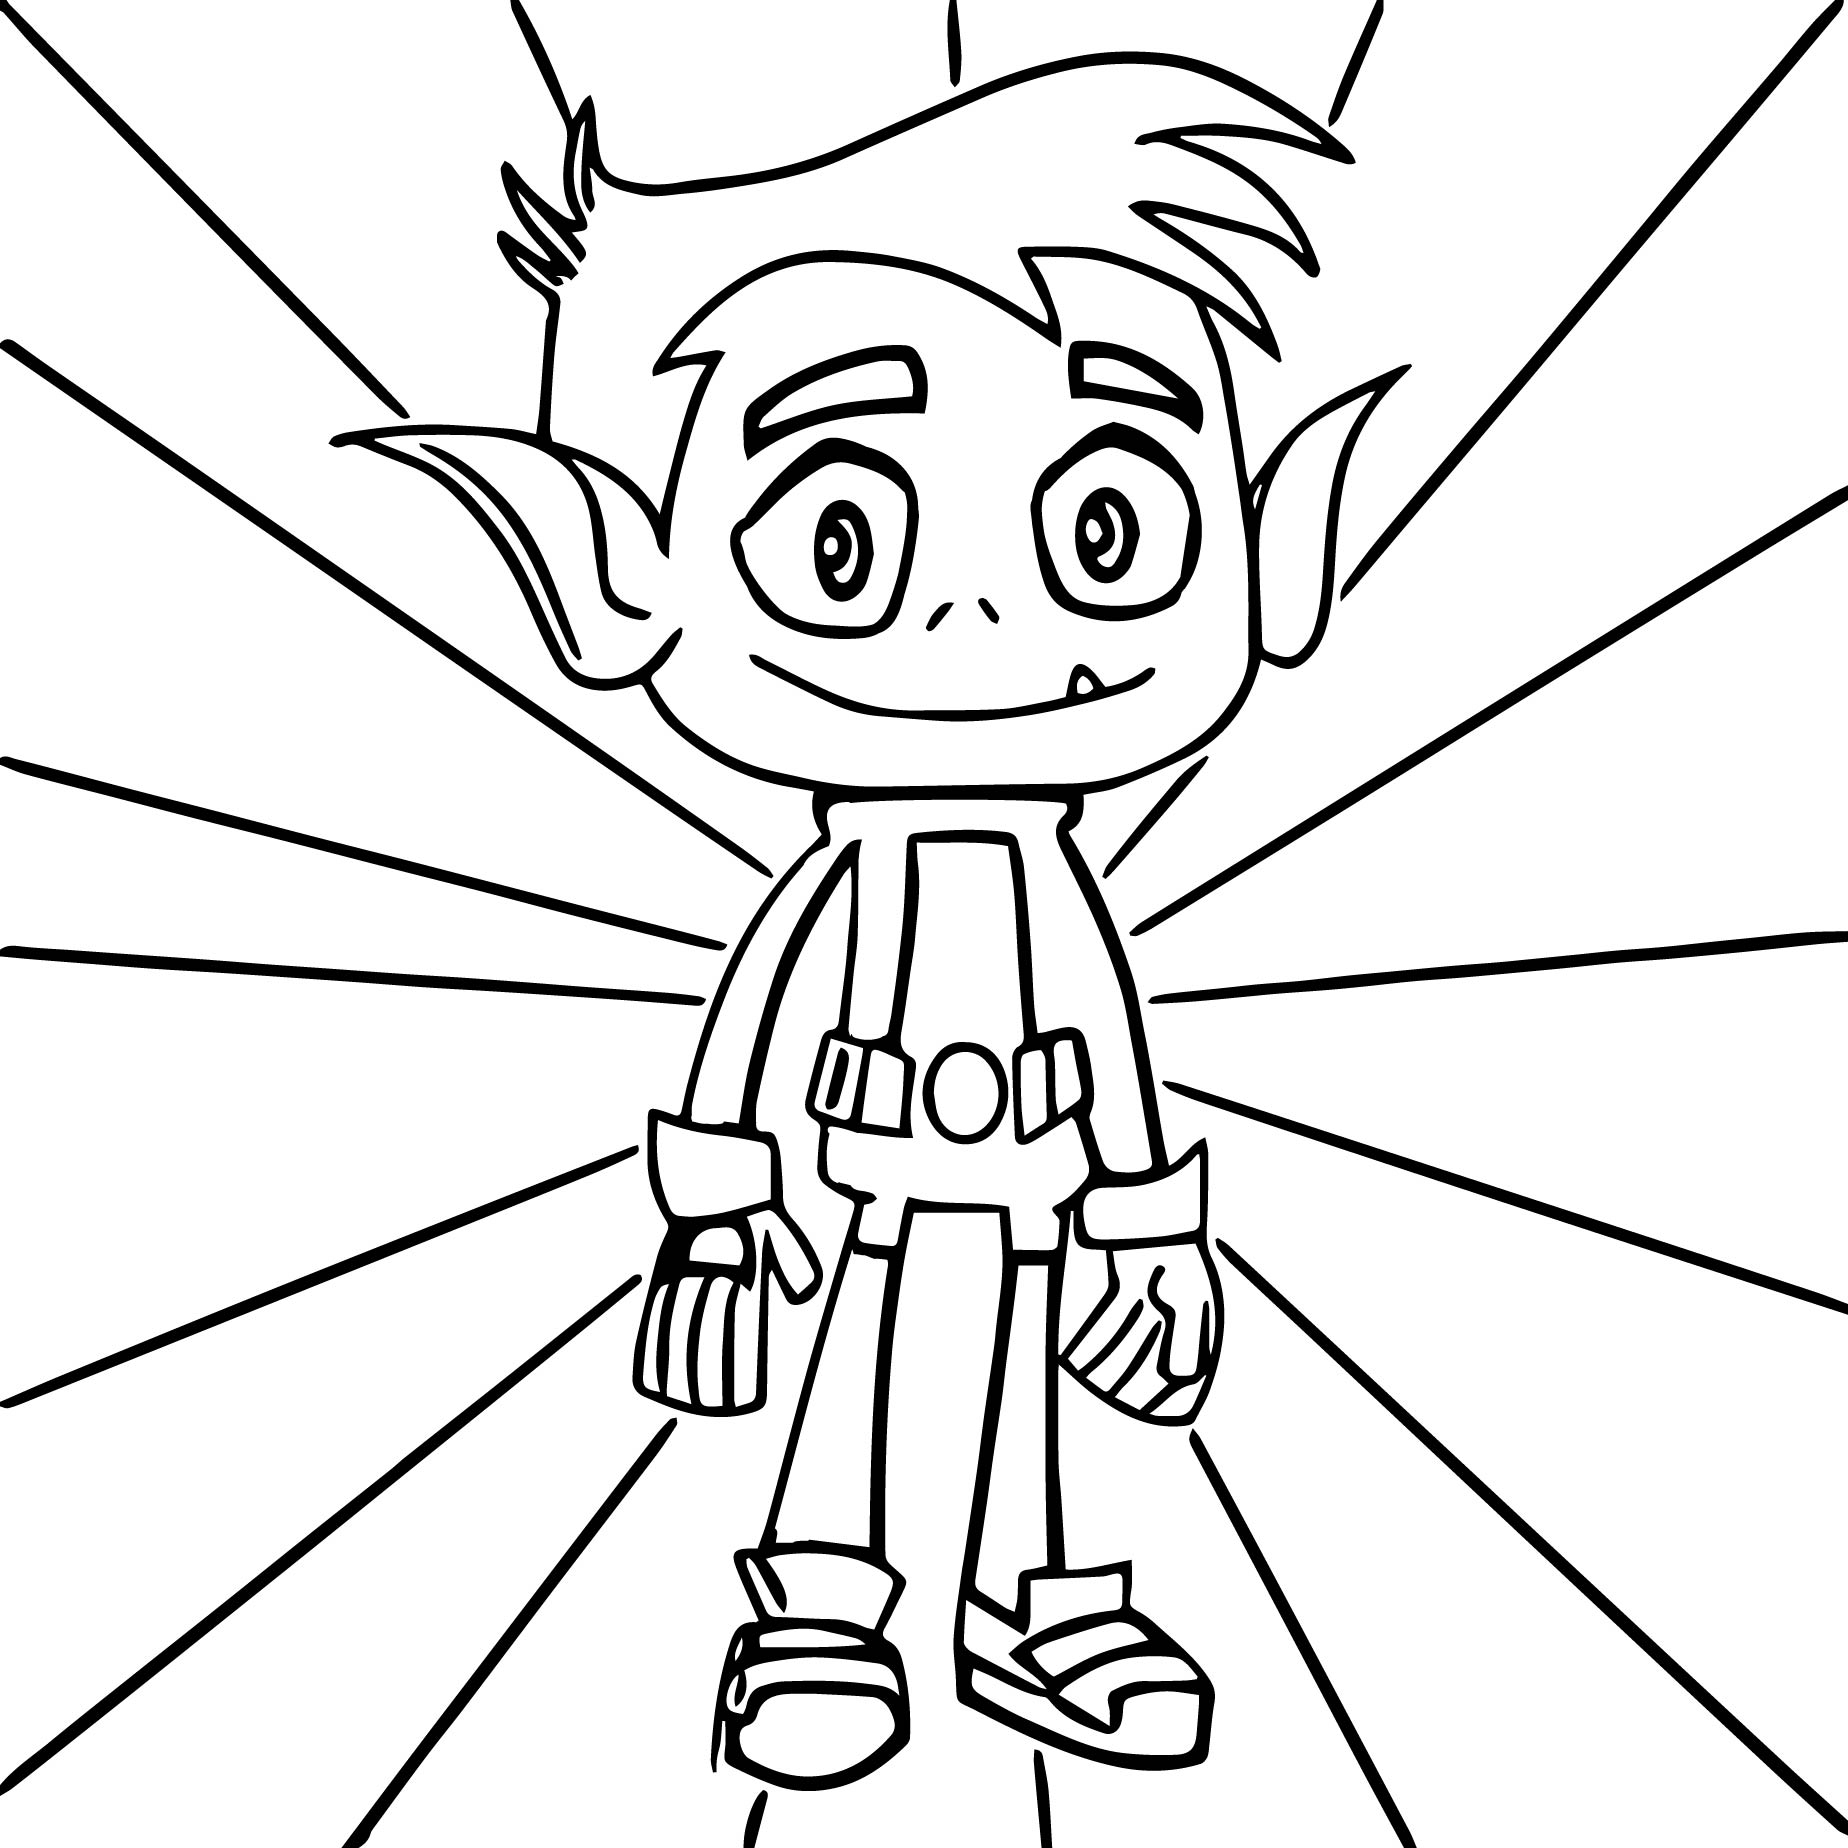 Teen Titans Coloring Pages Best Coloring Pages For Kids Coloring Wallpapers Download Free Images Wallpaper [coloring436.blogspot.com]